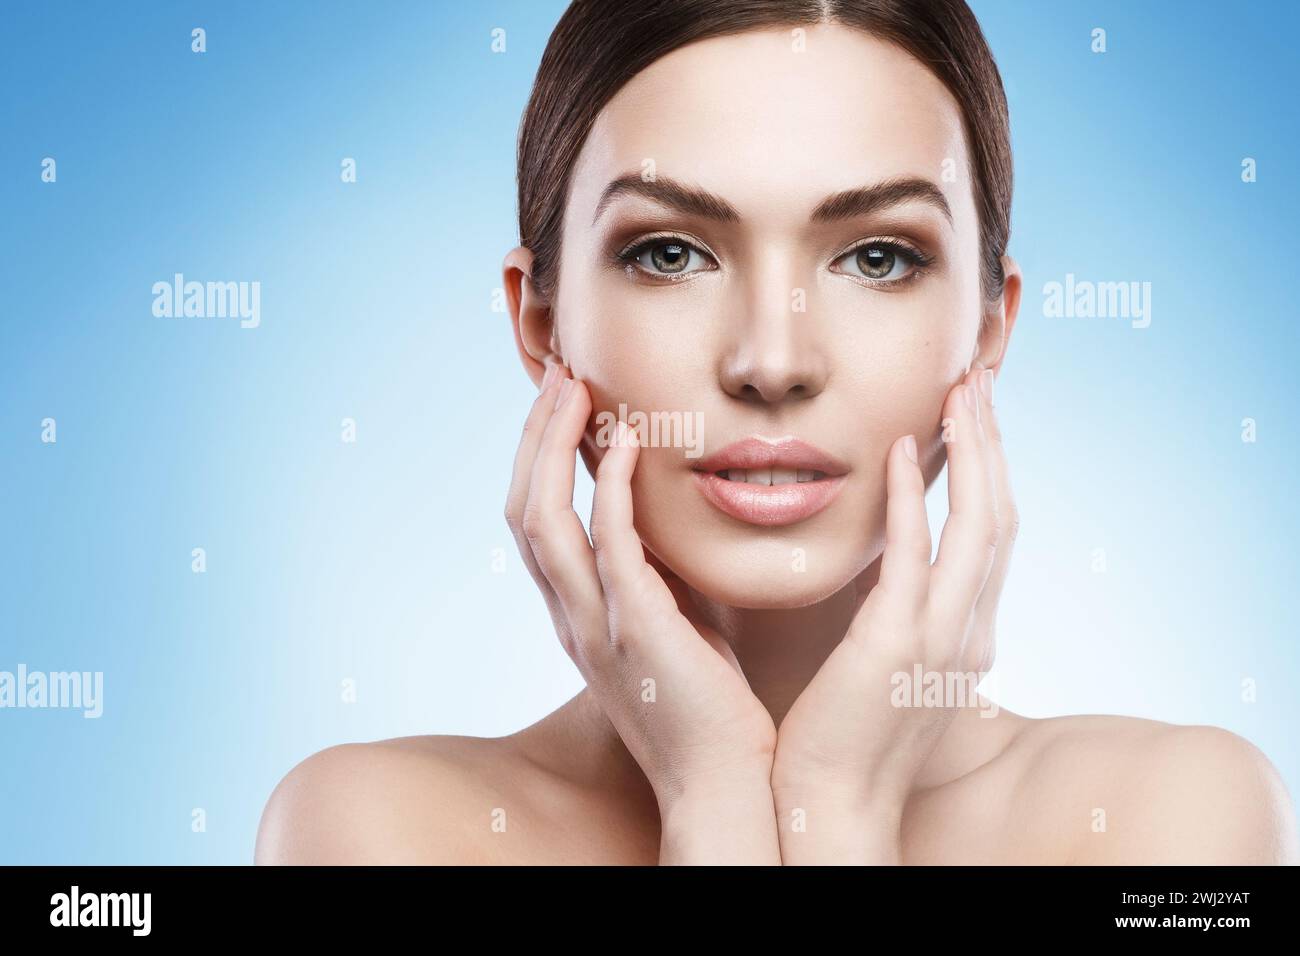 Young woman with natural makeup and smooth skin against light blue background Stock Photo